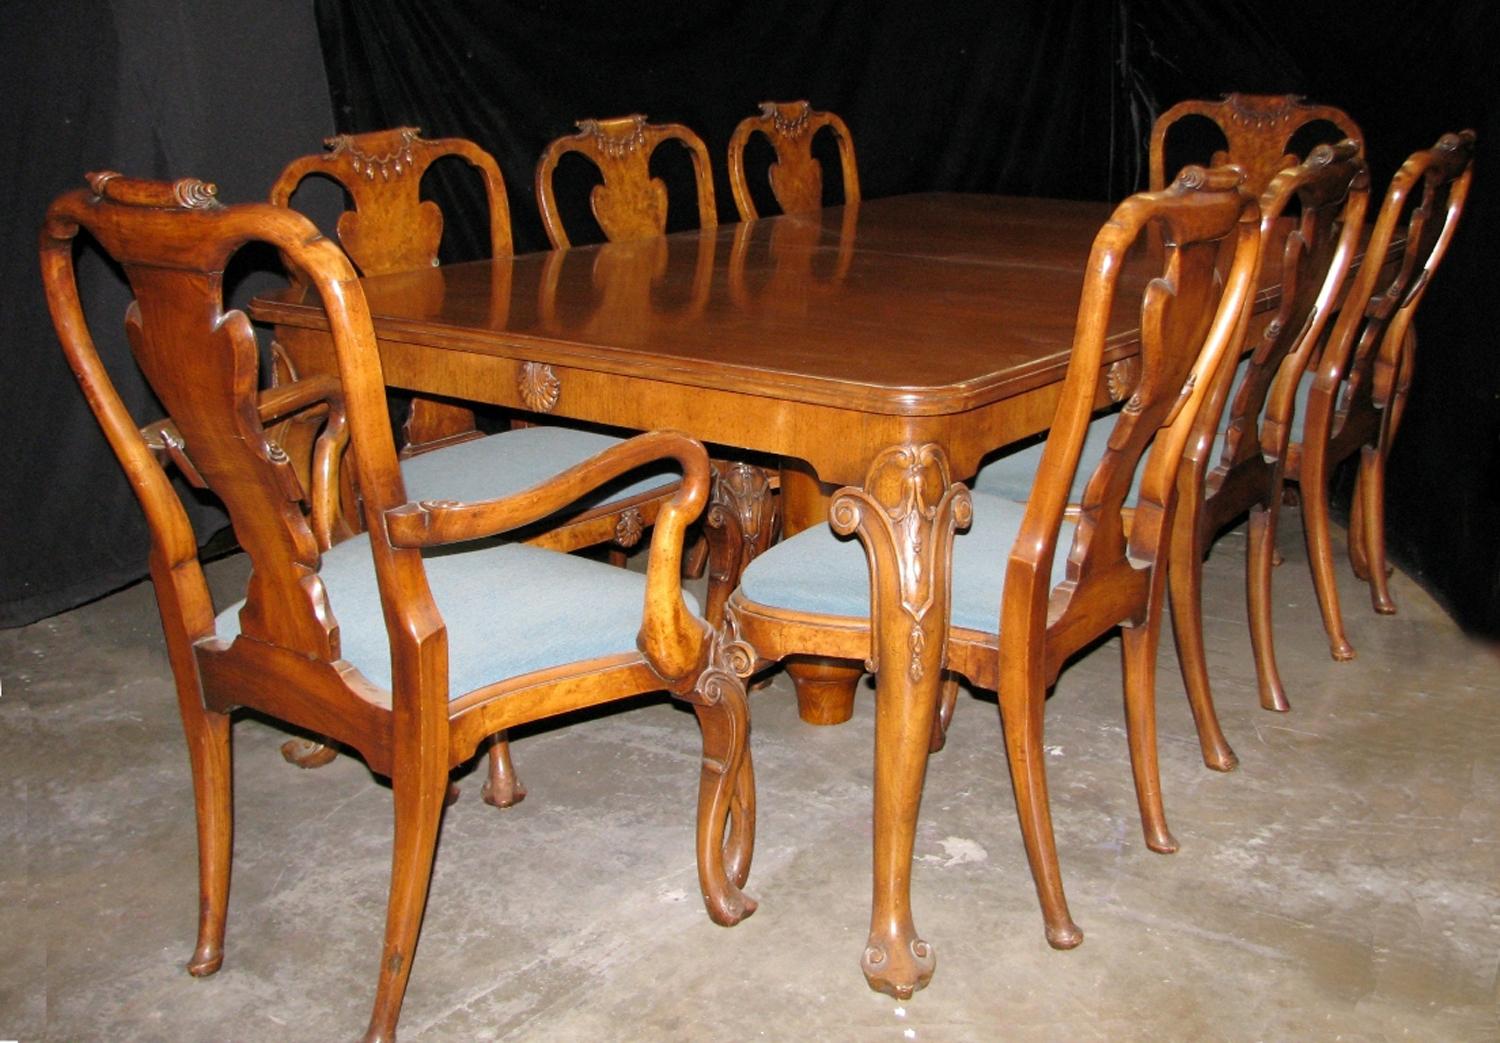 Hand-Carved English Carved Walnut Dining Set, 19th Century